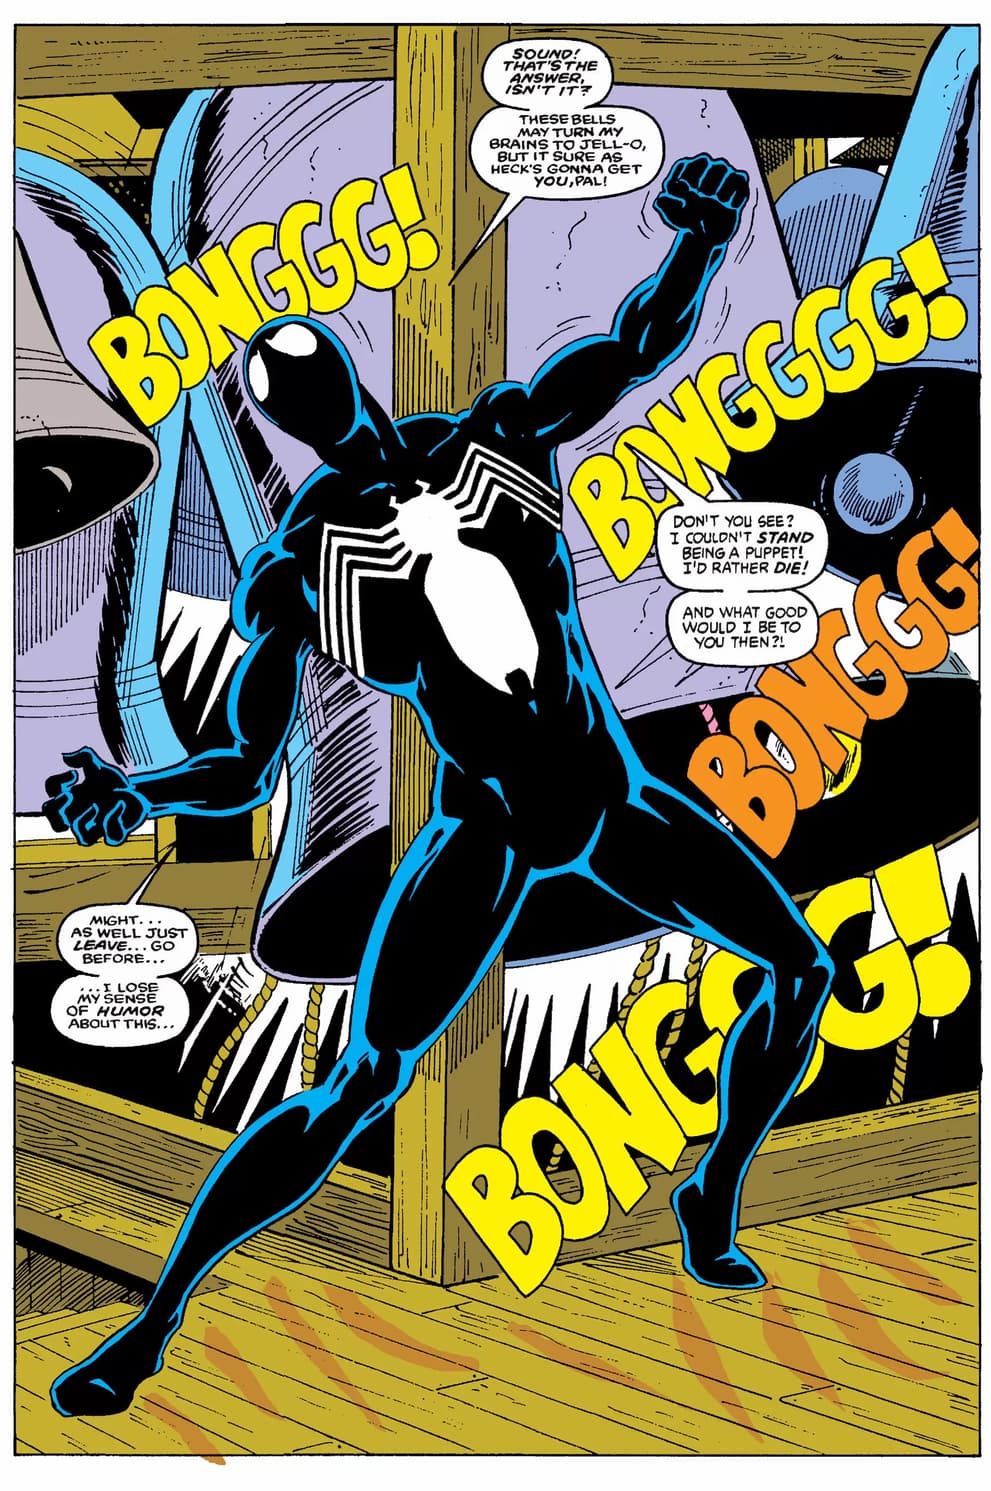 WEB OF SPIDER-MAN (1985) #1 artwork by Greg LaRocque, Jim Mooney, and George Roussos